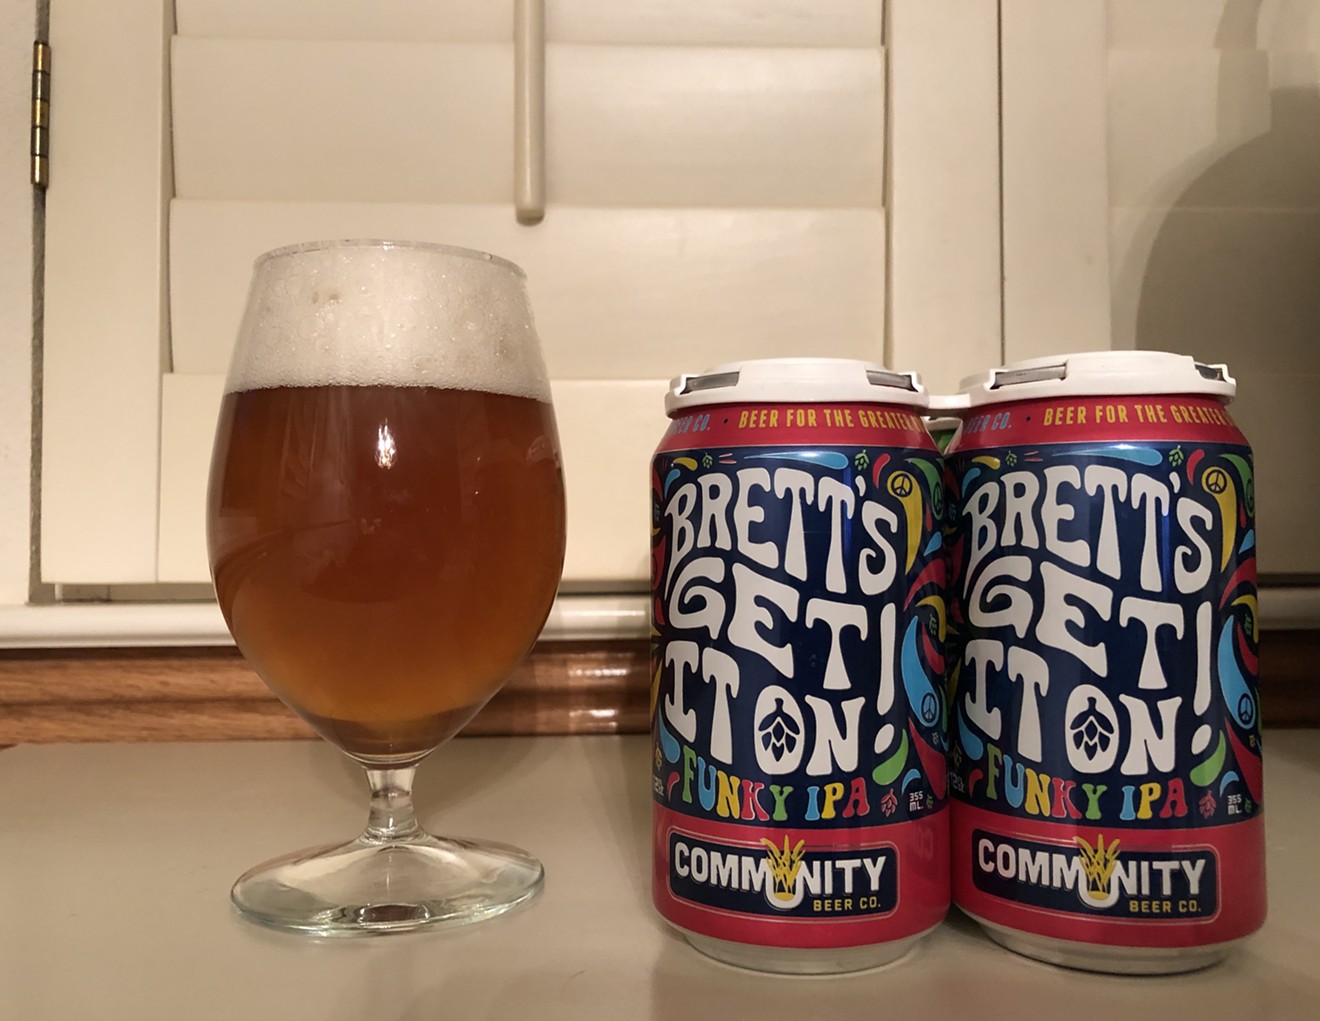 Community's Brett's Get It On is a funky IPA perfect for hopheads who want to get a little sour.